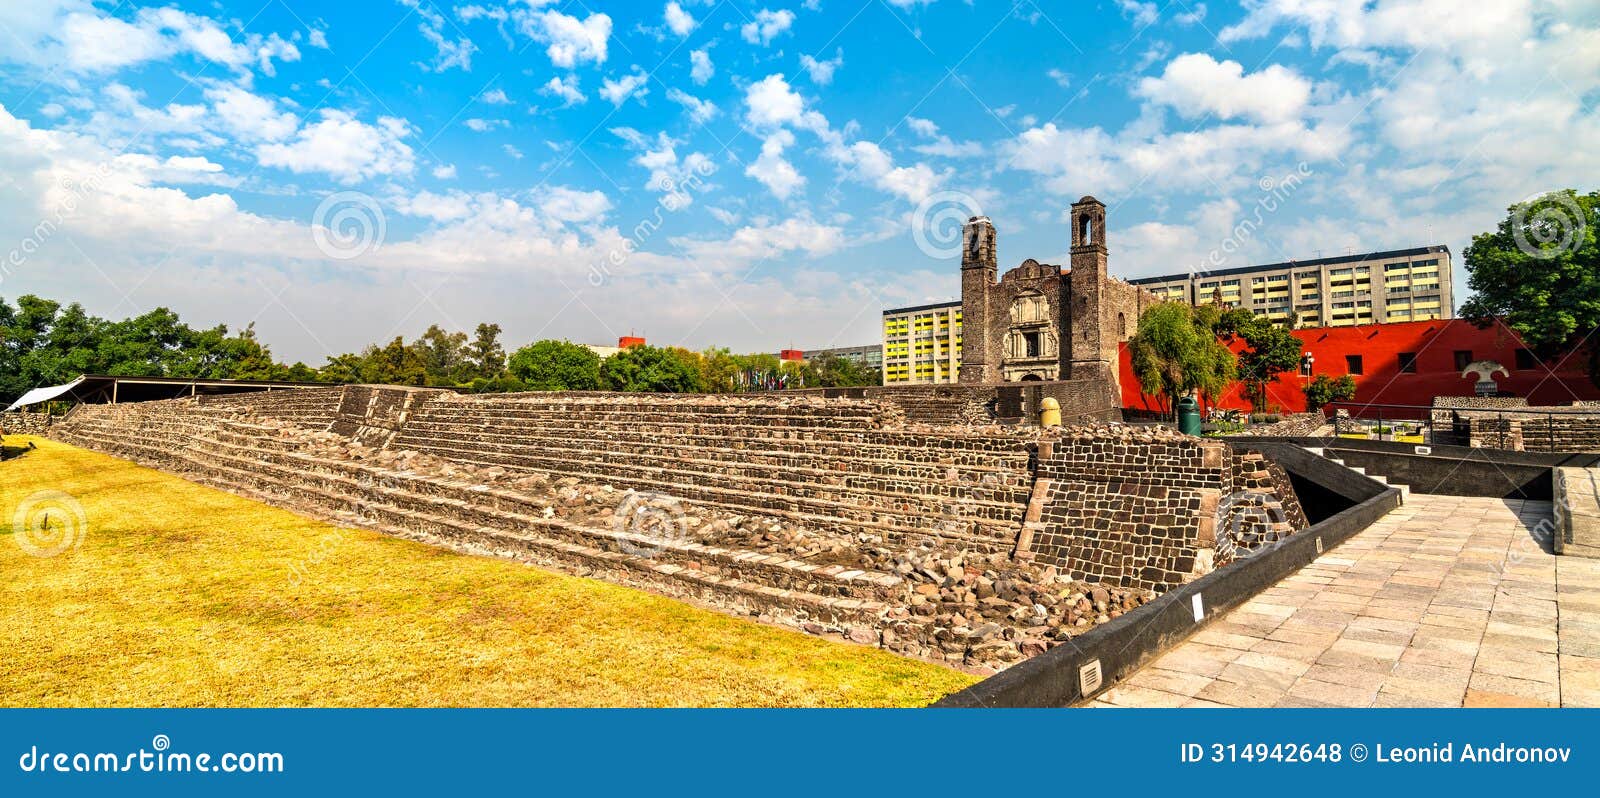 tlatelolco archaeological zone in mexico city, mexico